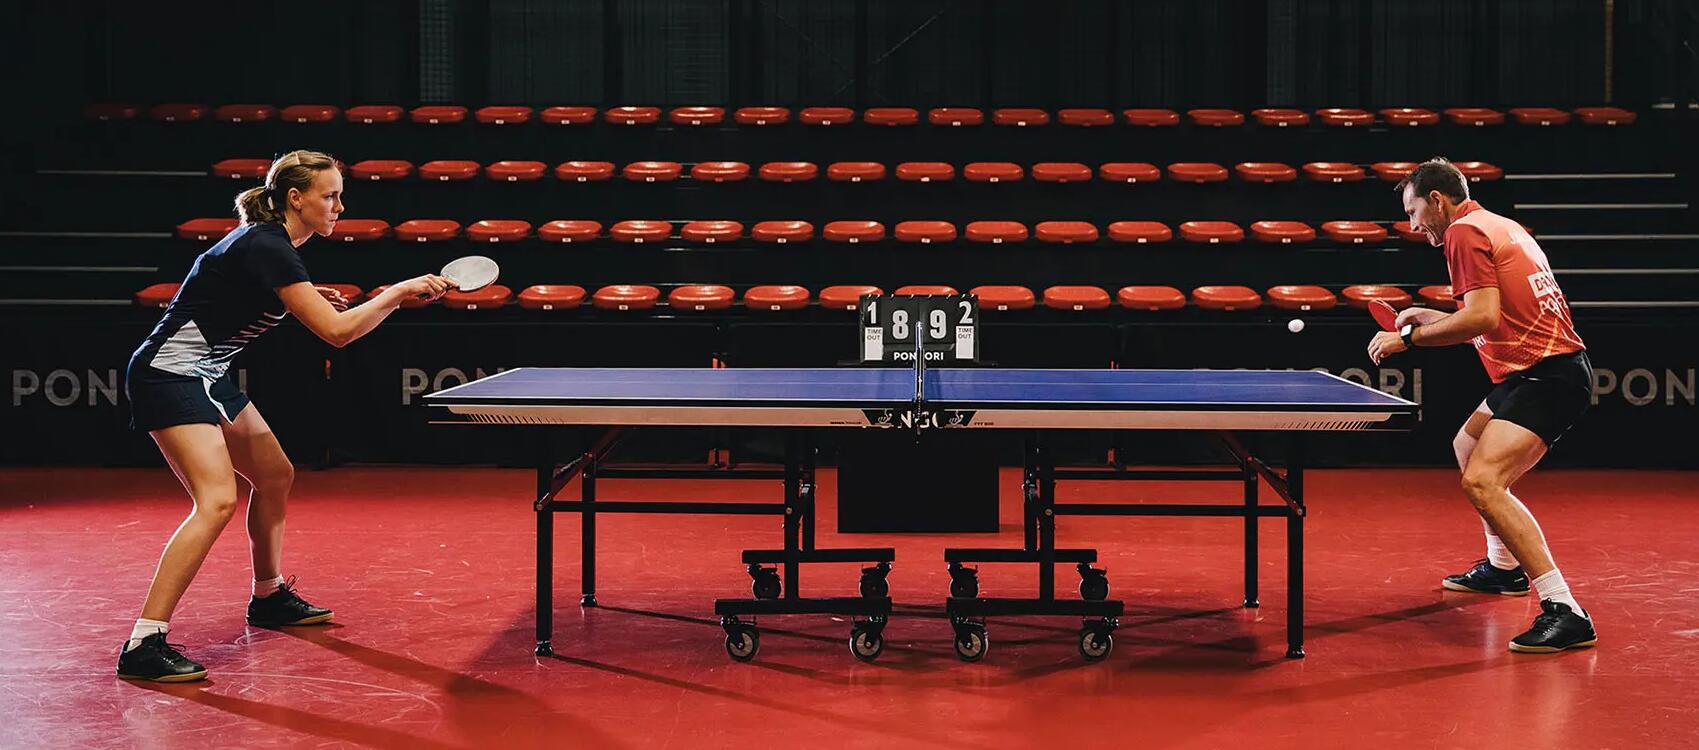 Man and woman competing in table tennis tournament 